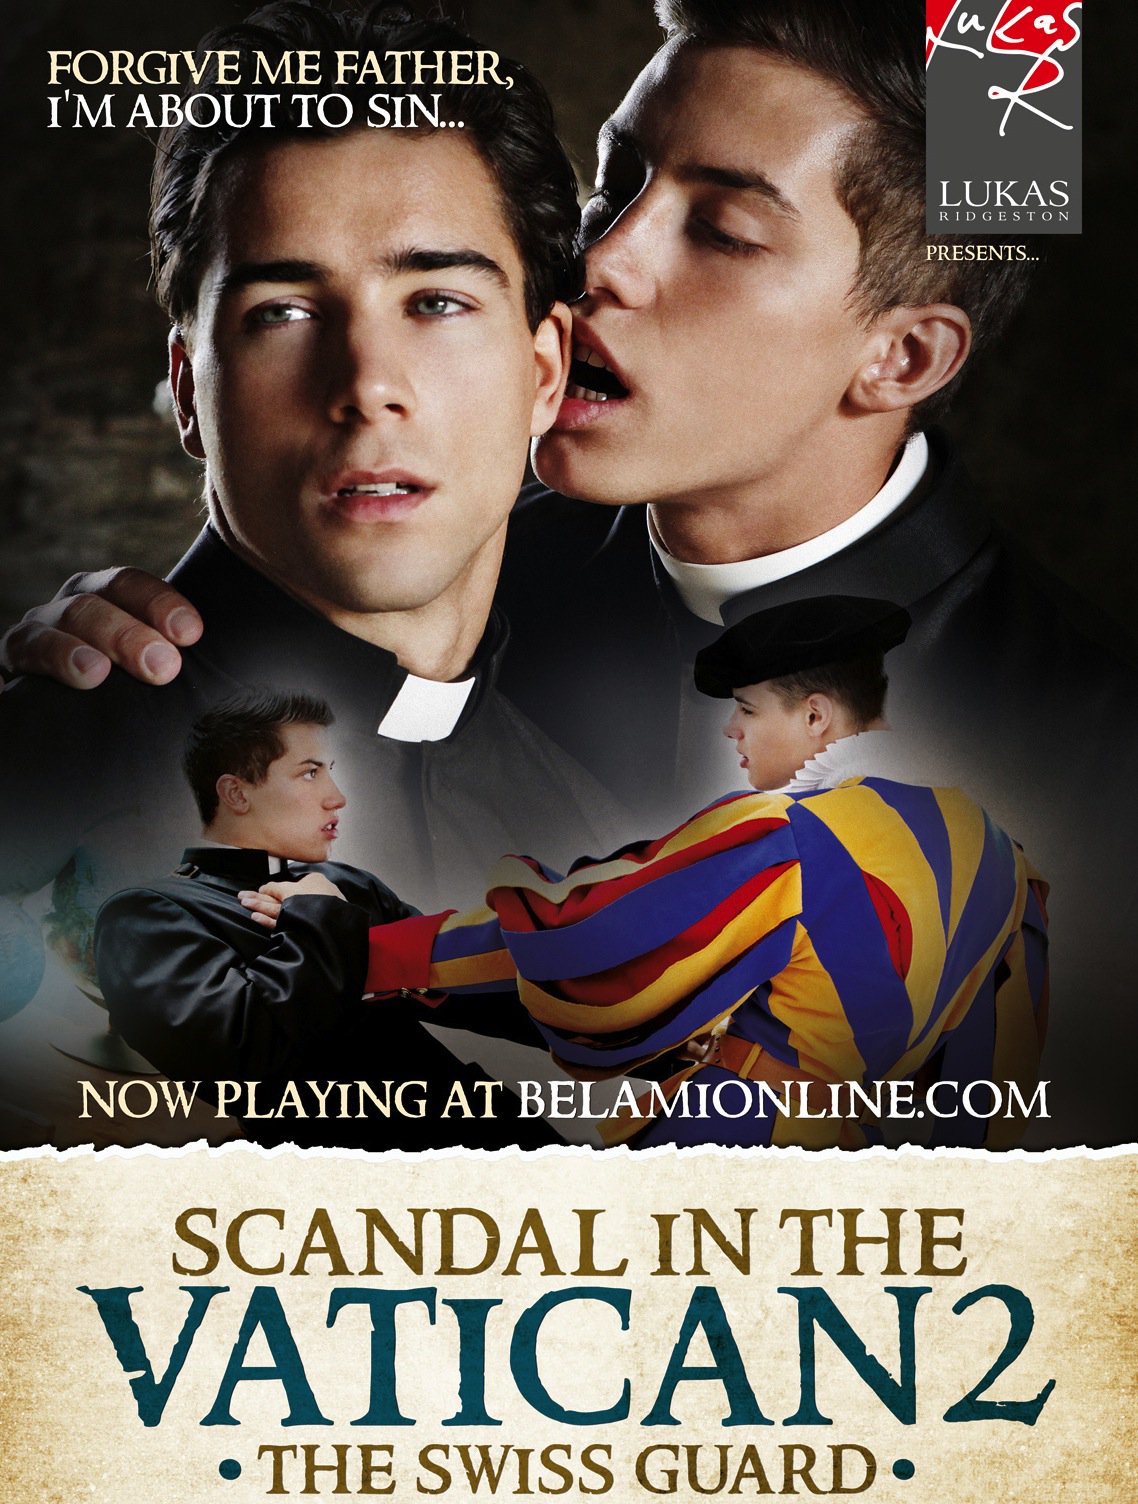 “* @belamionline 's SCANDAL IN THE VATICAN 2. Have you gotten your ...